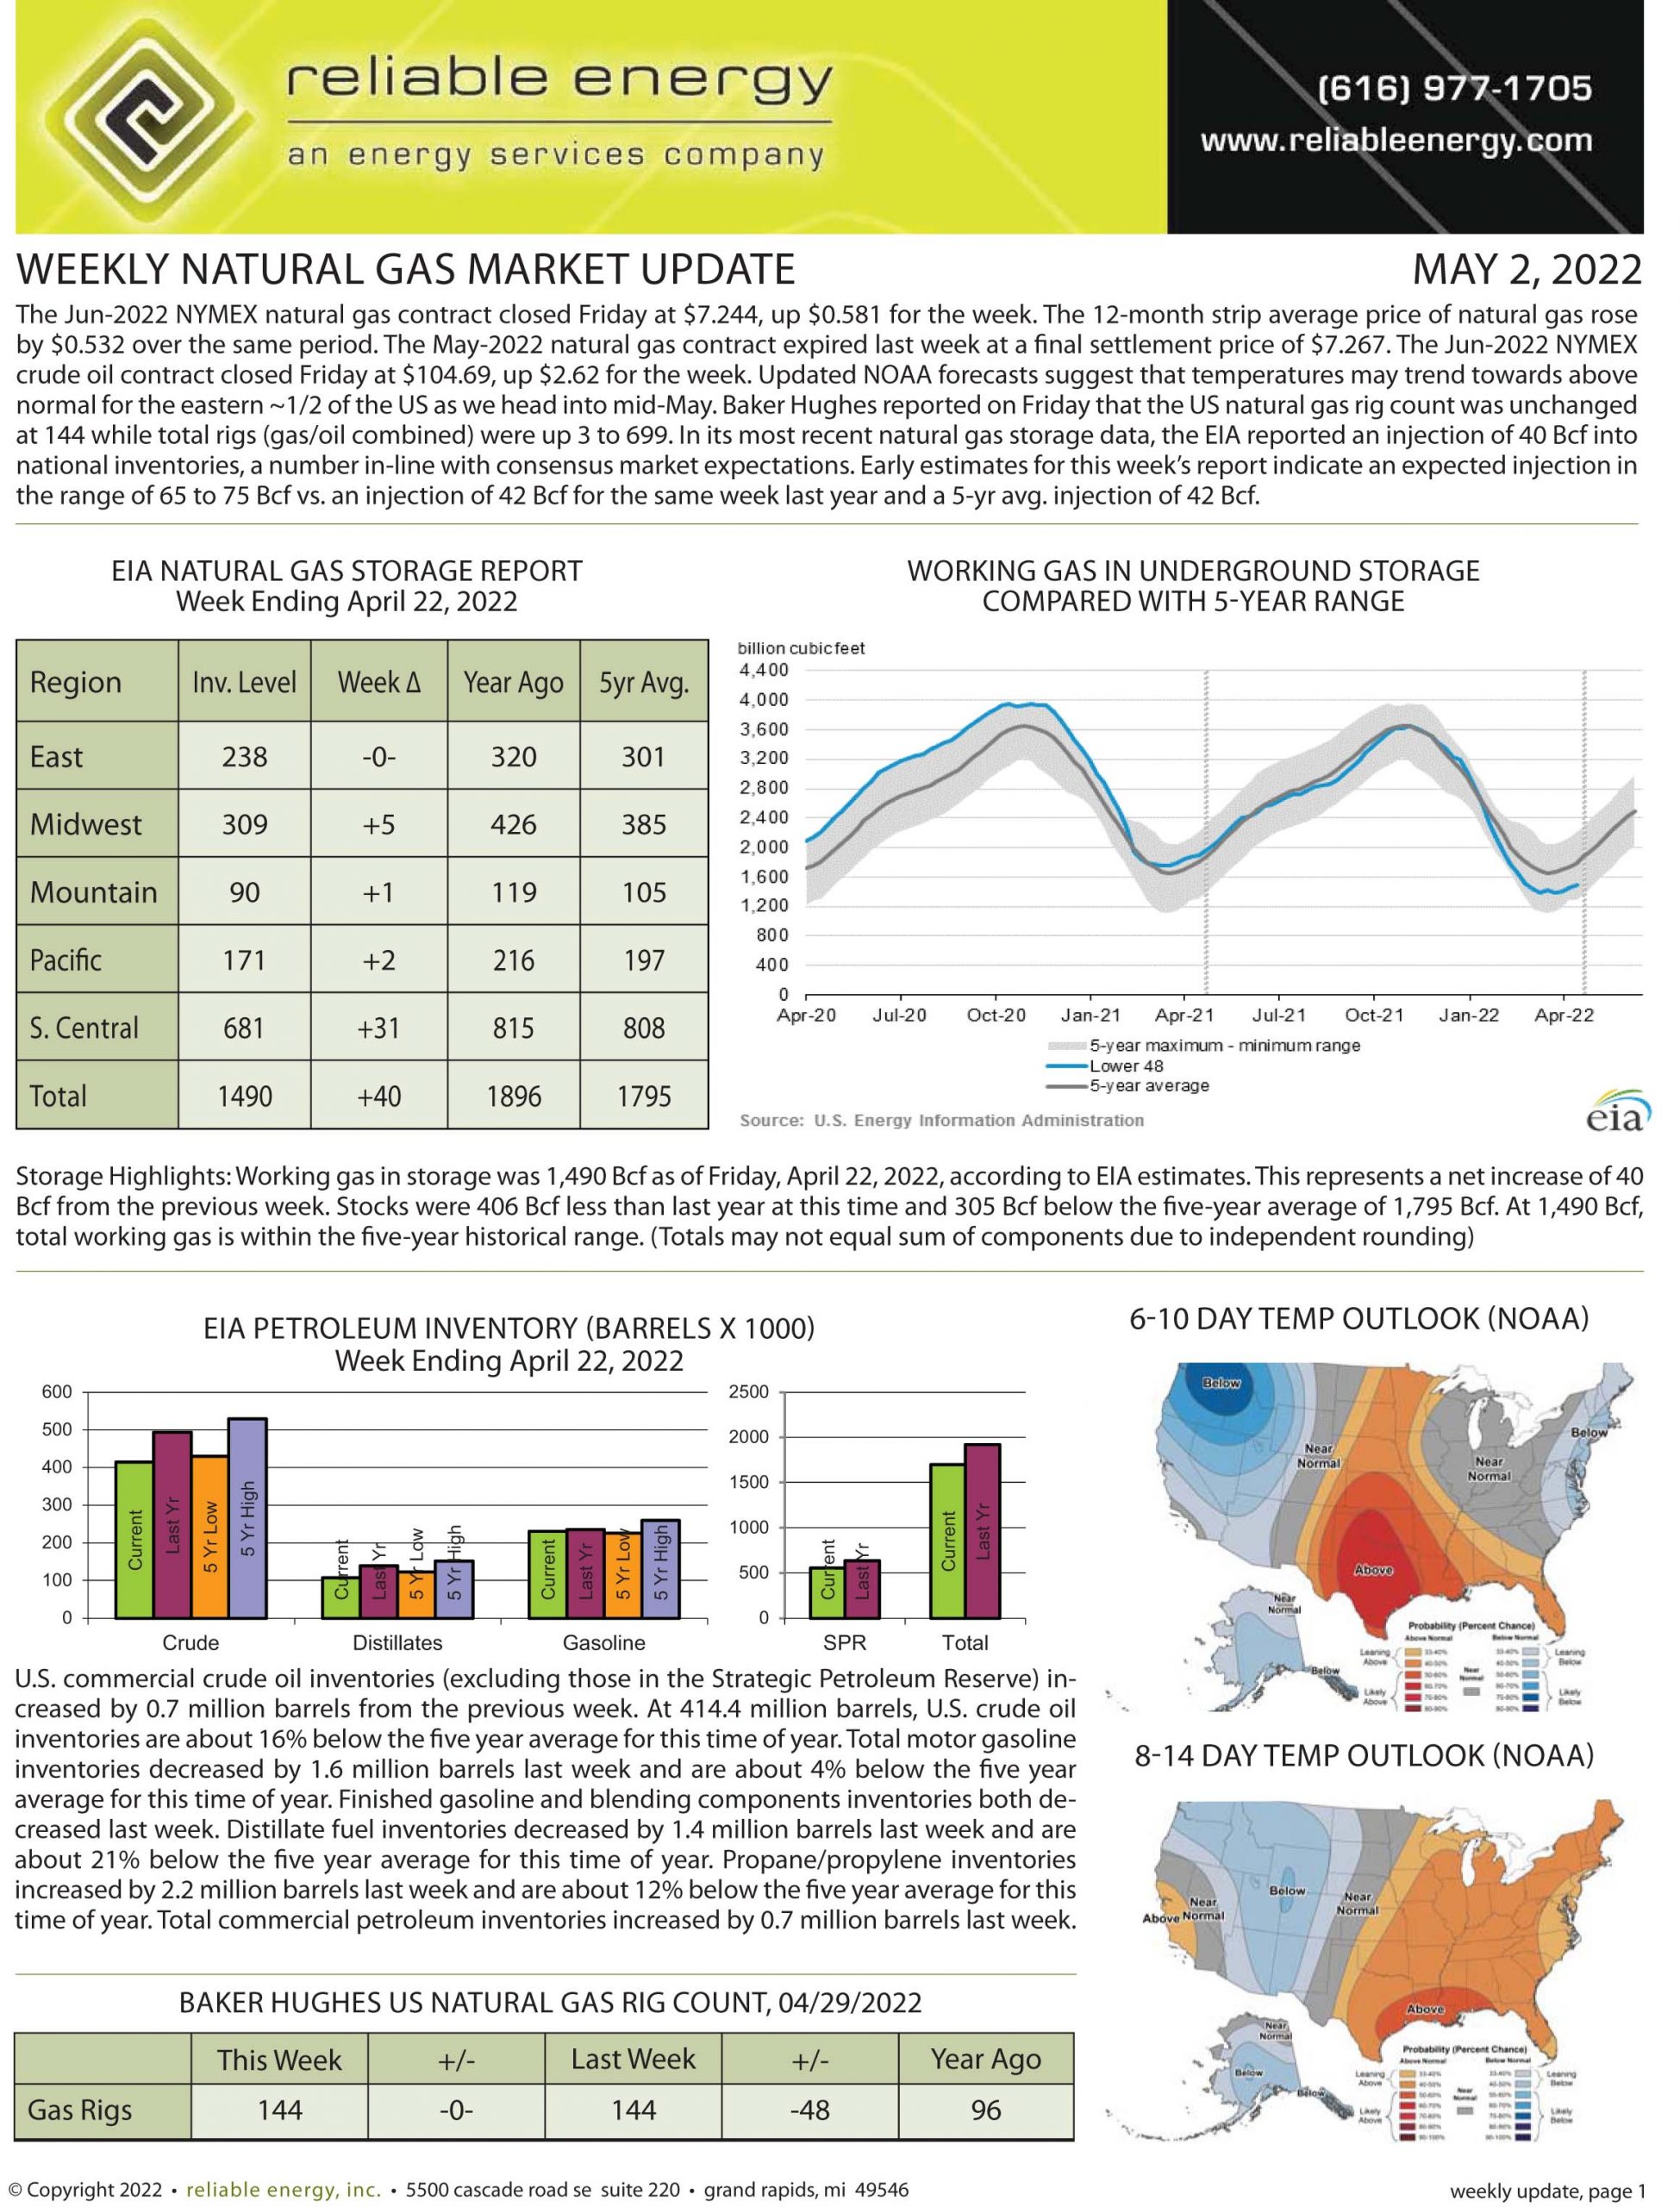 Natural Gas Market Update – May 2, 2022